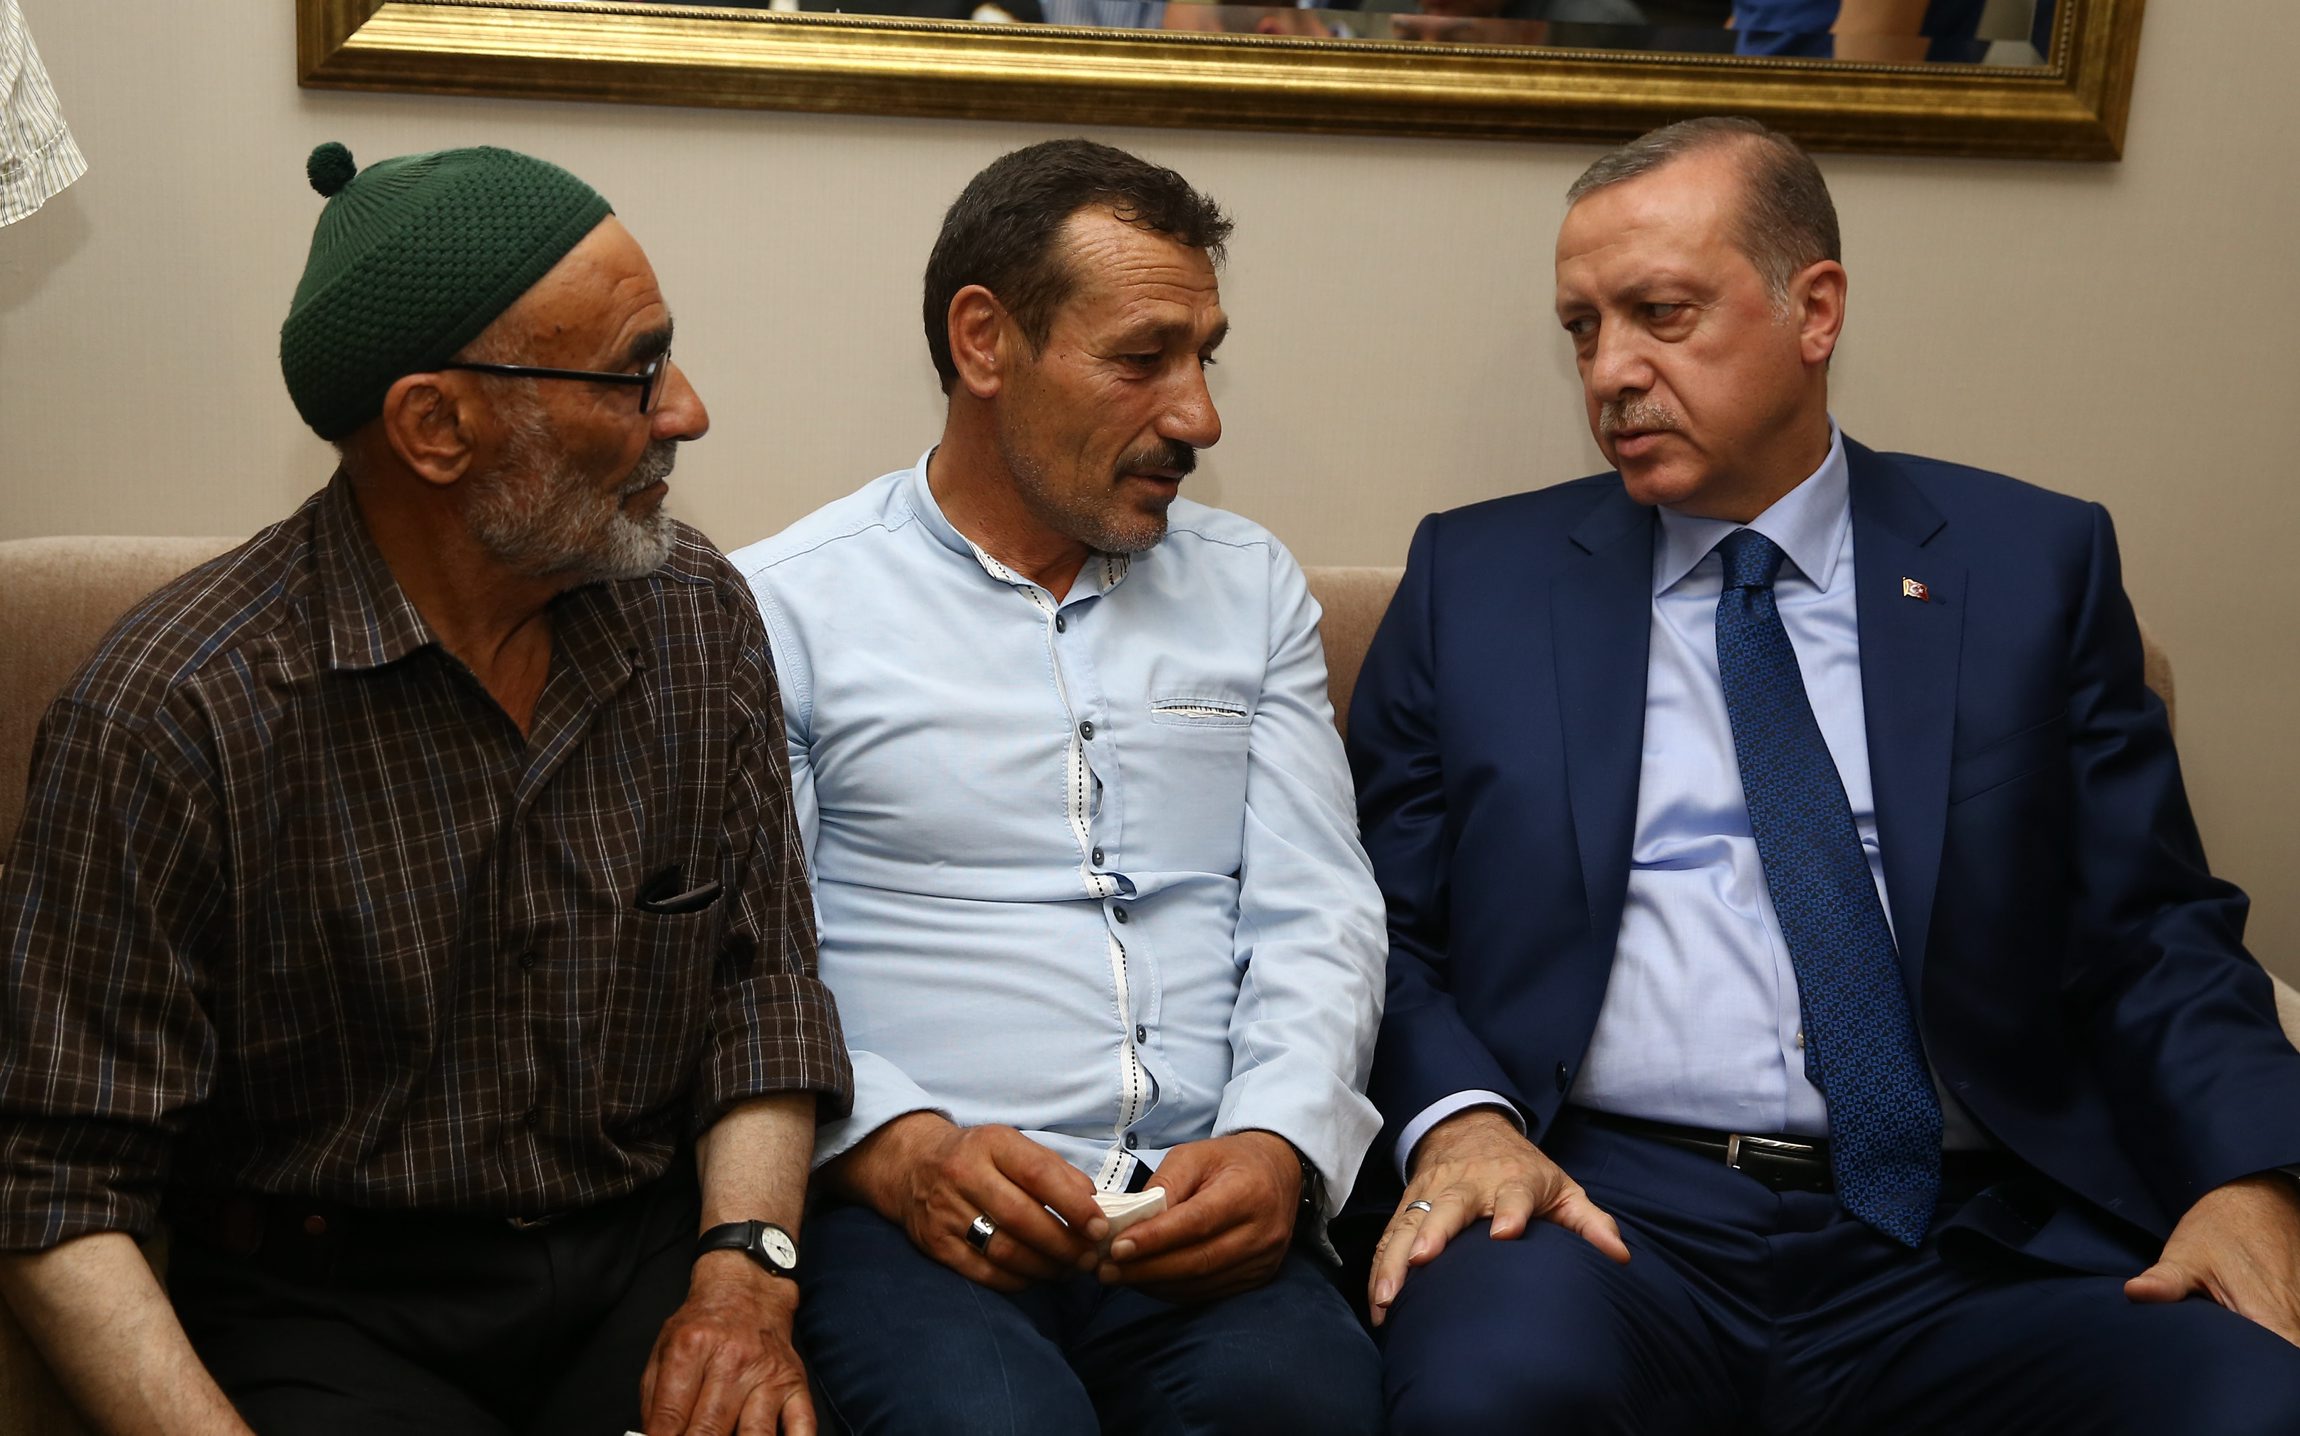 He spoke with the Yaşar family for a while.